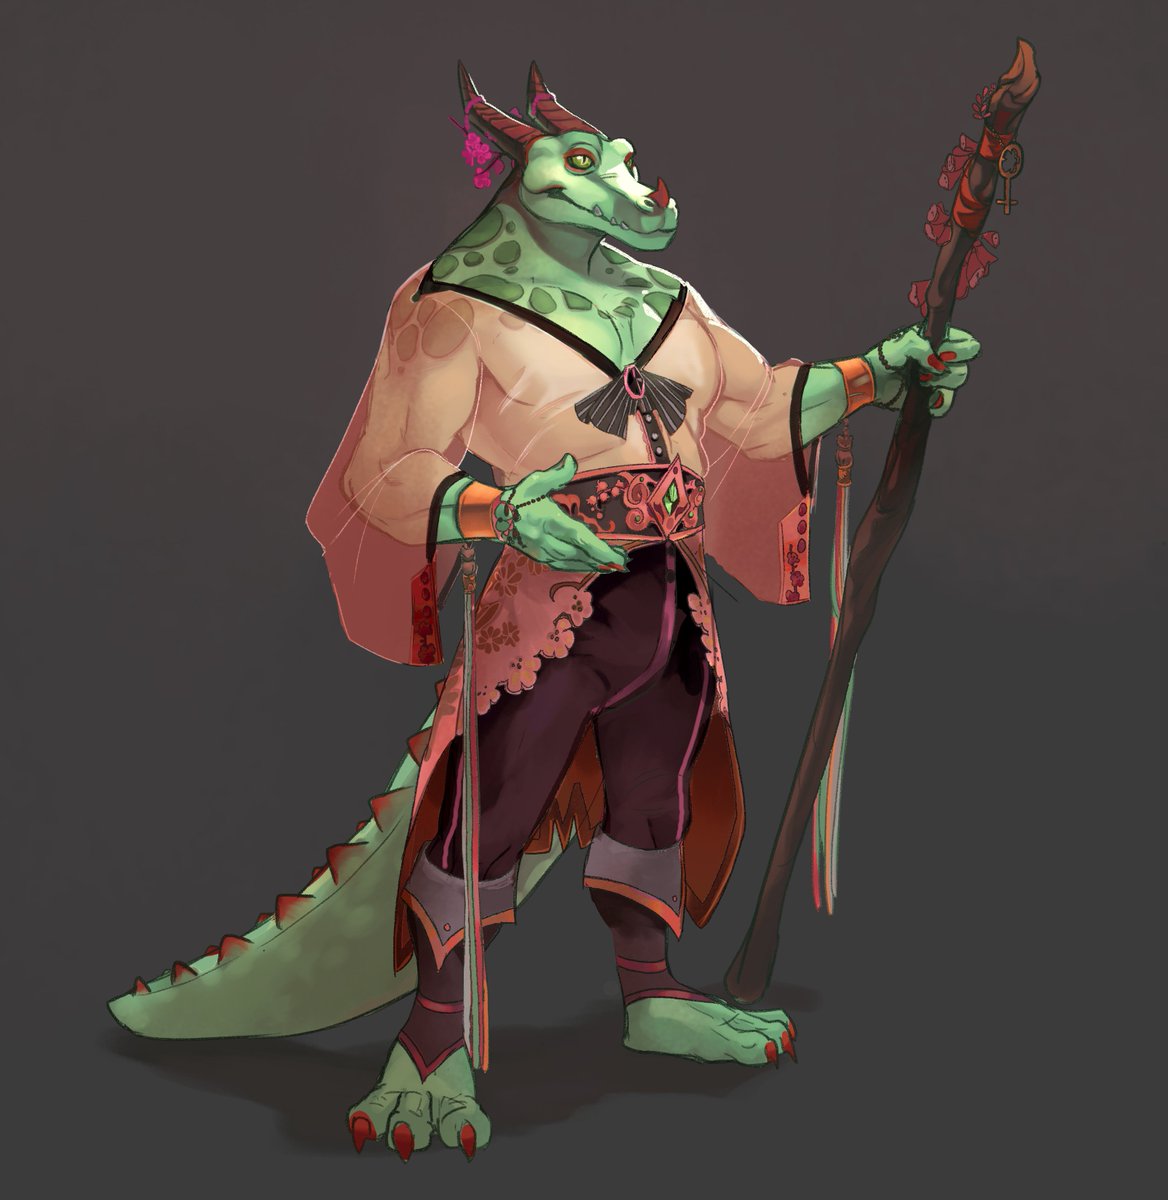 Think I finally figured out a design for my dragonborn druid, Galvanarr! 